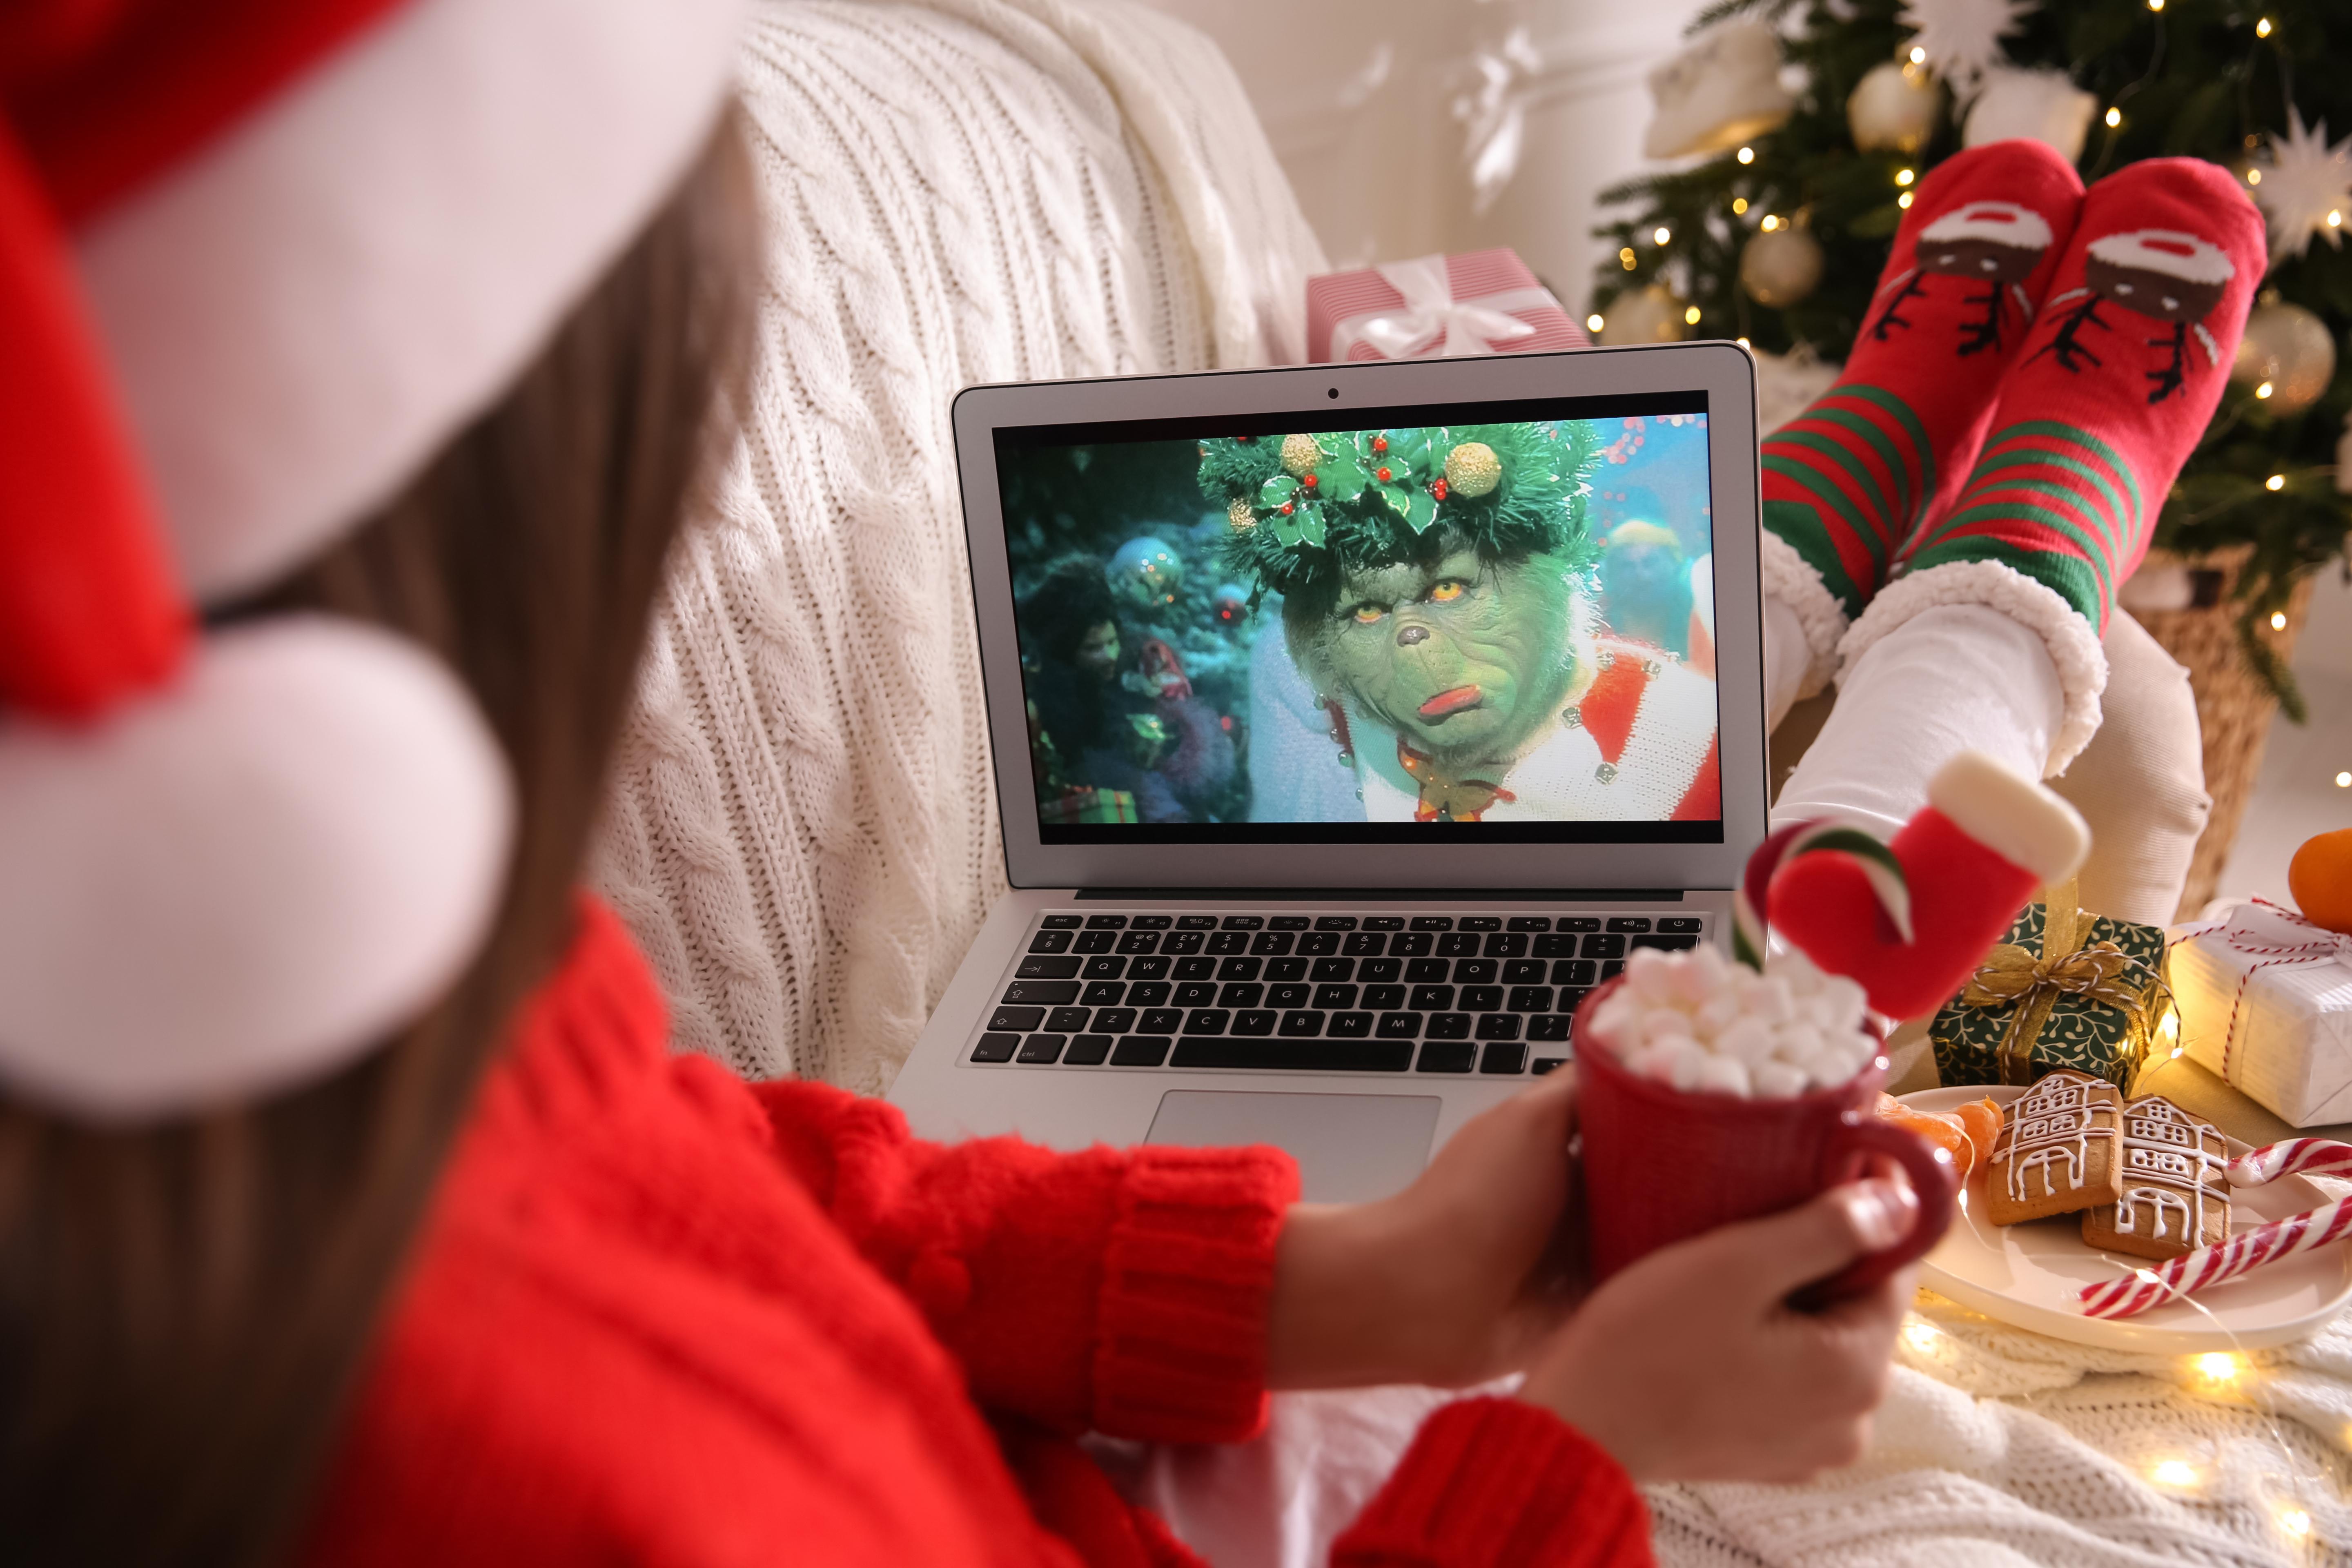 MYKOLAIV, UKRAINE - DECEMBER 25, 2020: Woman with sweet drink watching The Grinch movie on laptop at home, closeup. Cozy winter holidays atmosphere